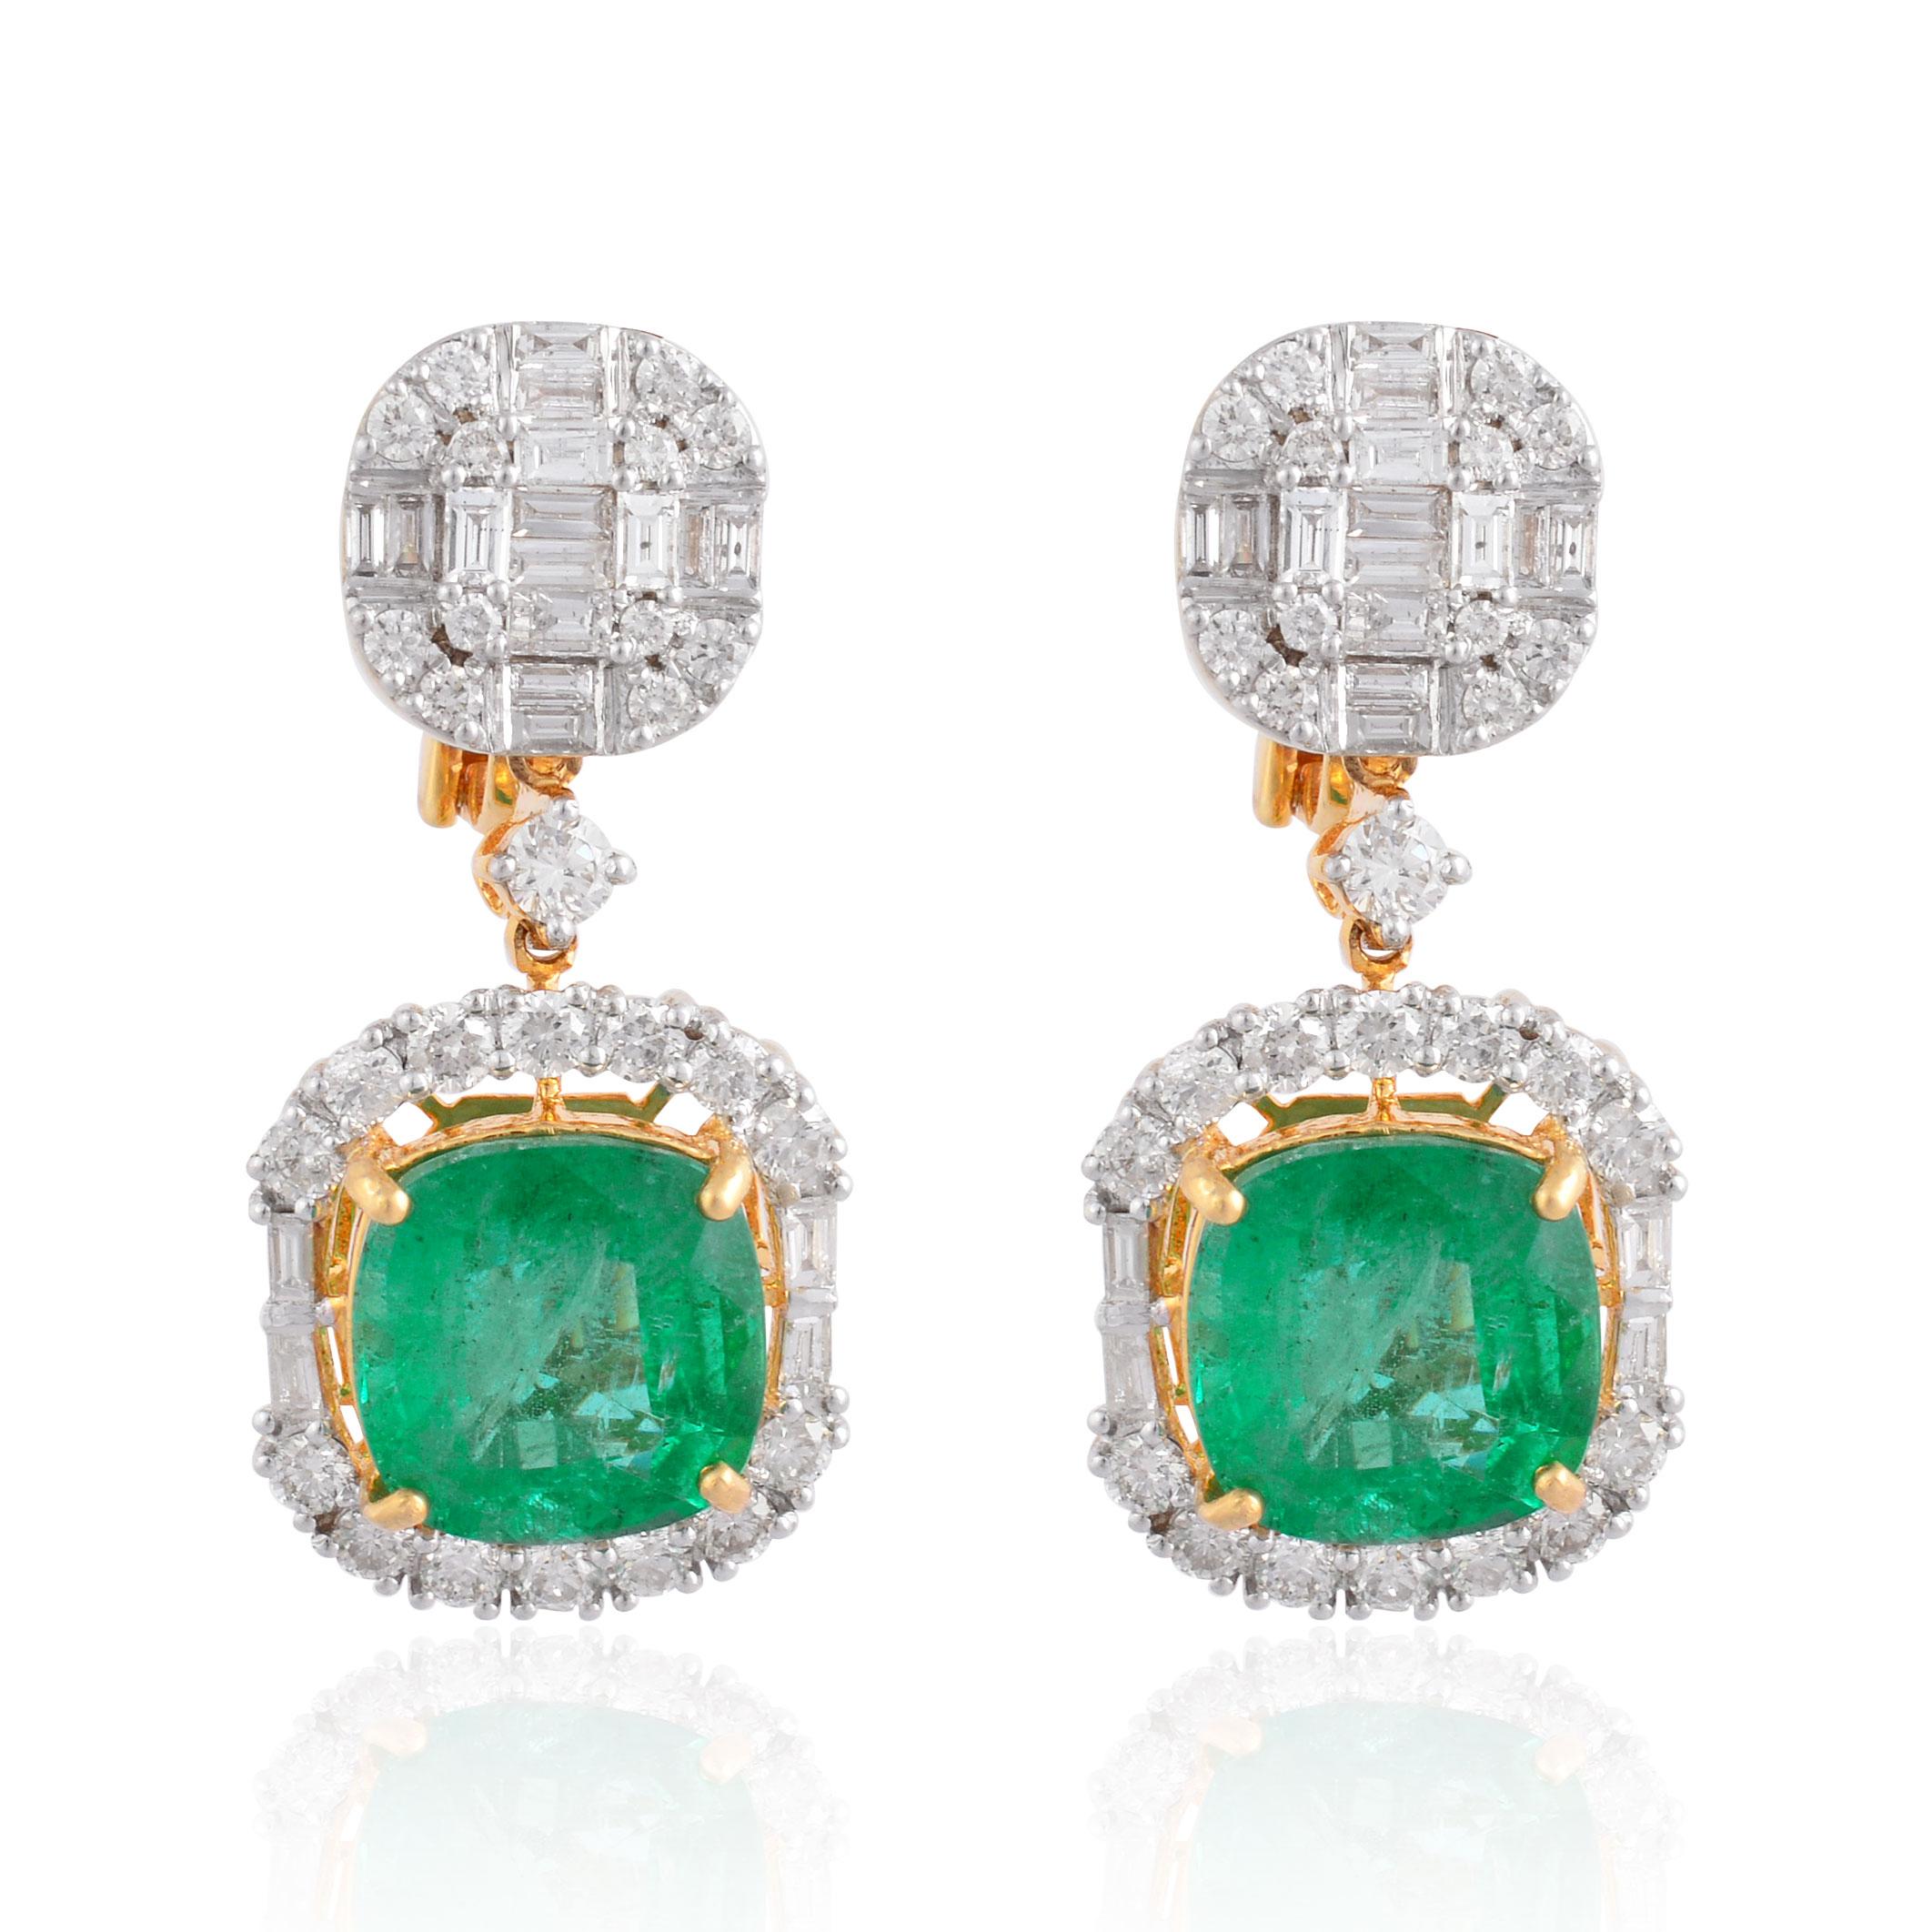 Item Code :- CN-31154
Gross Wt. :- 14.54 gm
18k Gold Wt. :- 11.80 gm
Diamond Wt. :- 3.40 Ct. ( AVERAGE DIAMOND CLARITY SI1-SI2 & COLOR H-I )
Emerald Wt. :- 10.30 Ct.
✦ Sizing
.....................
We can adjust most items to fit your sizing